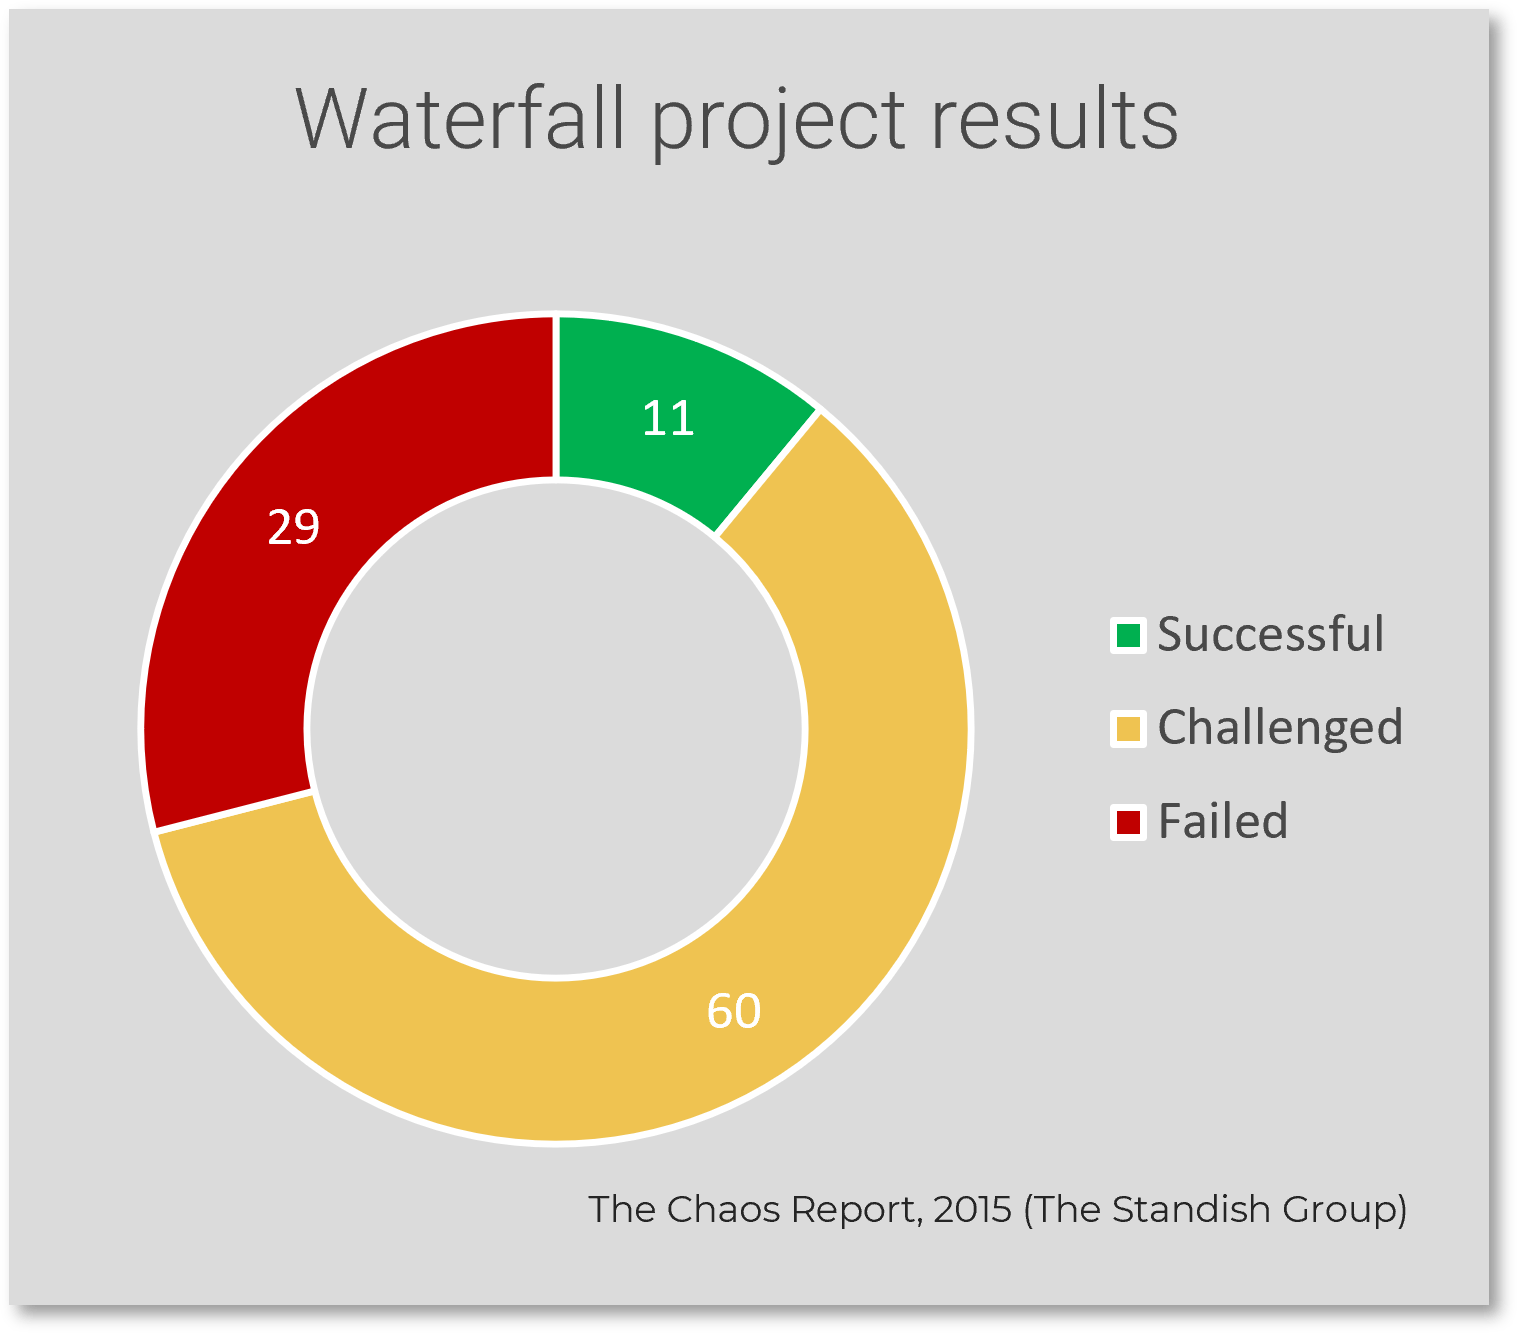 This is an image of the waterfall project results